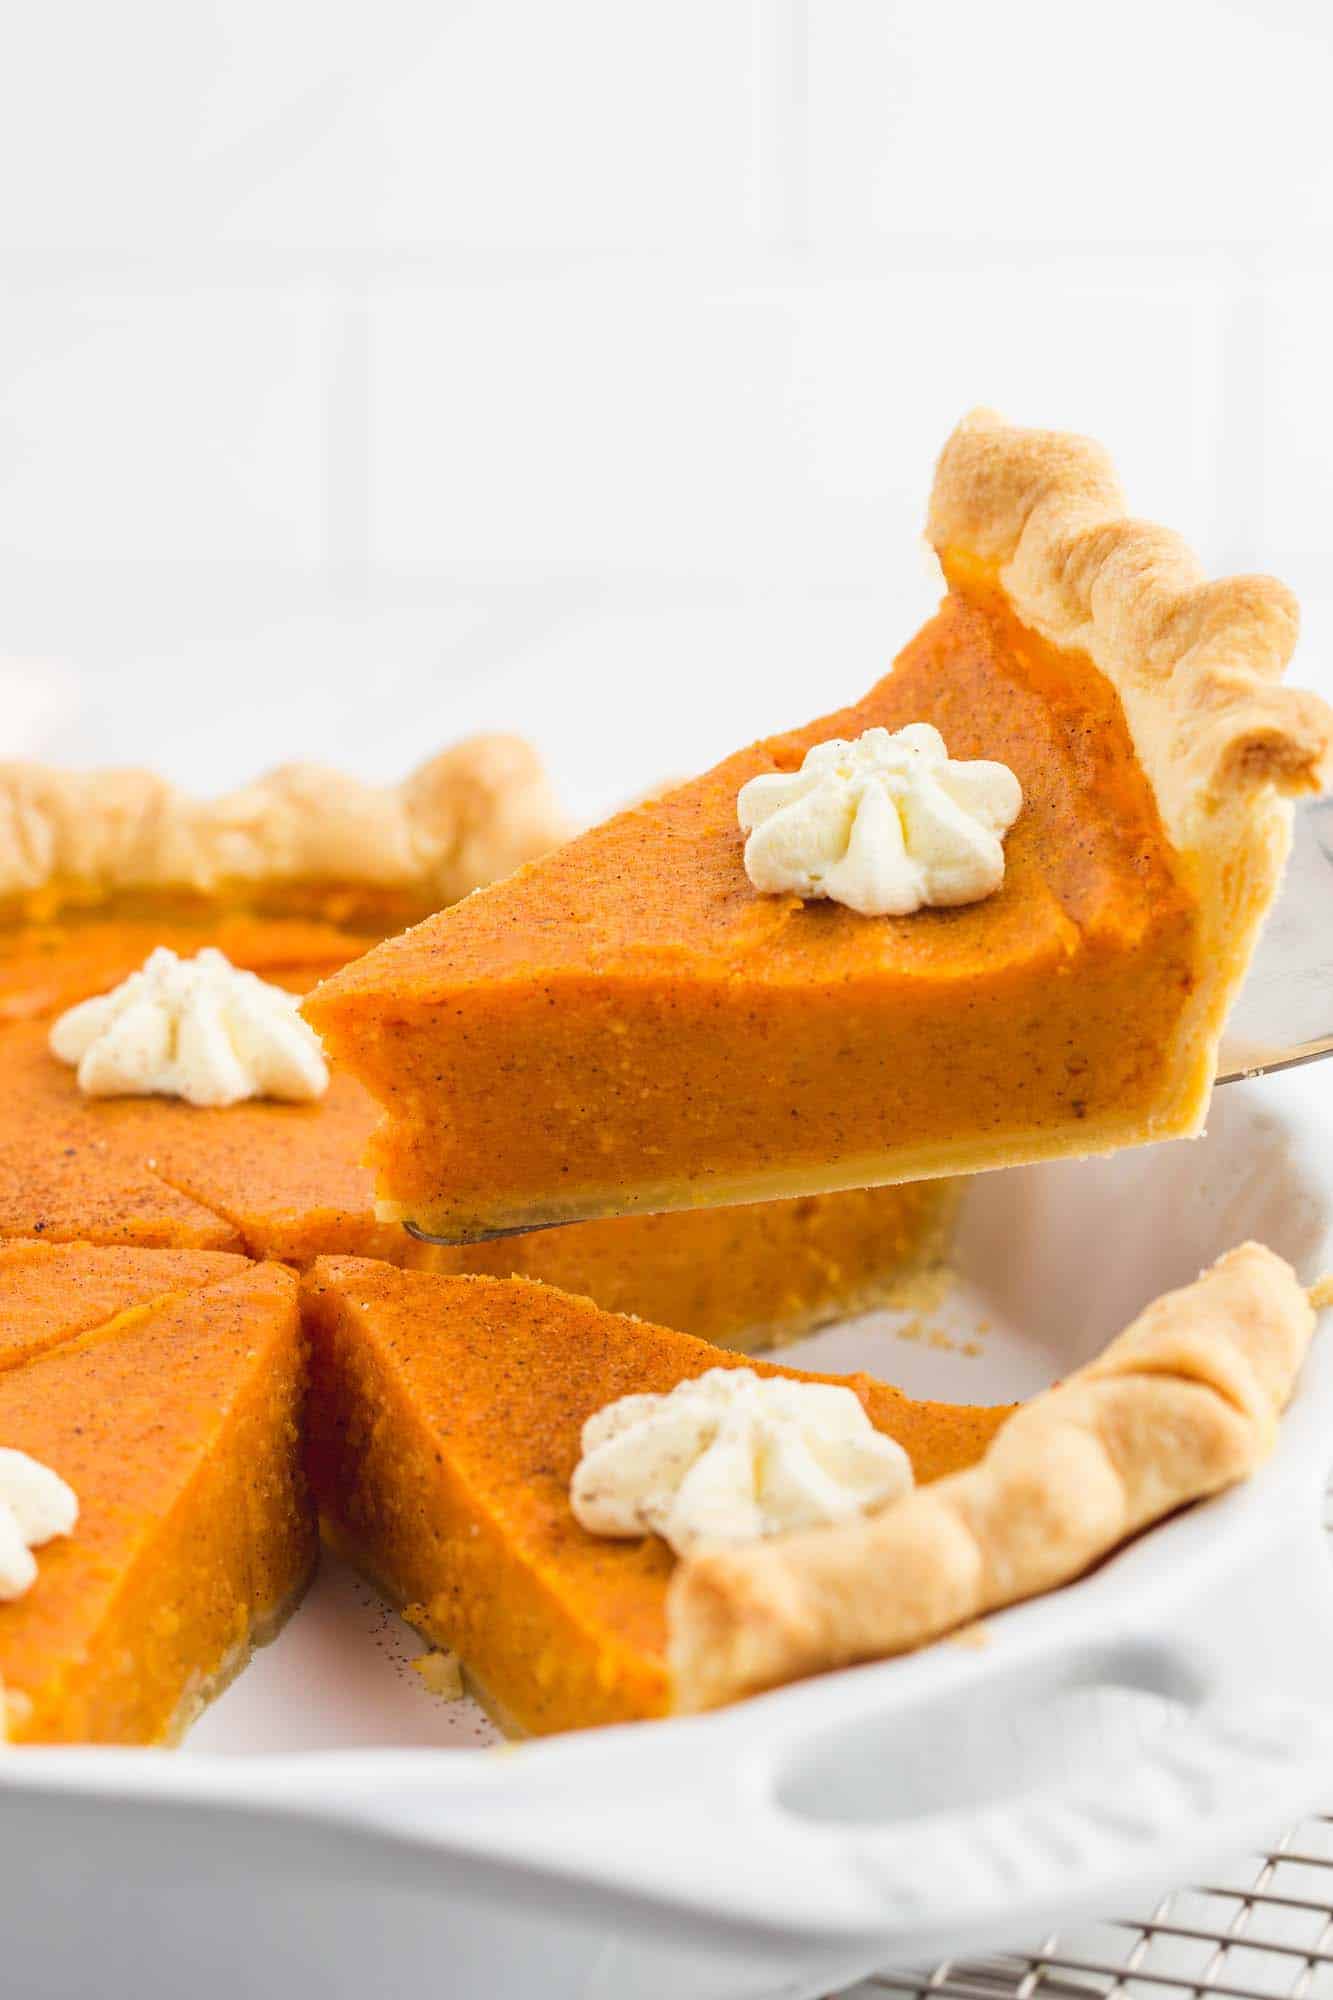 Taking a slice of sweet potato pie from the pie dish